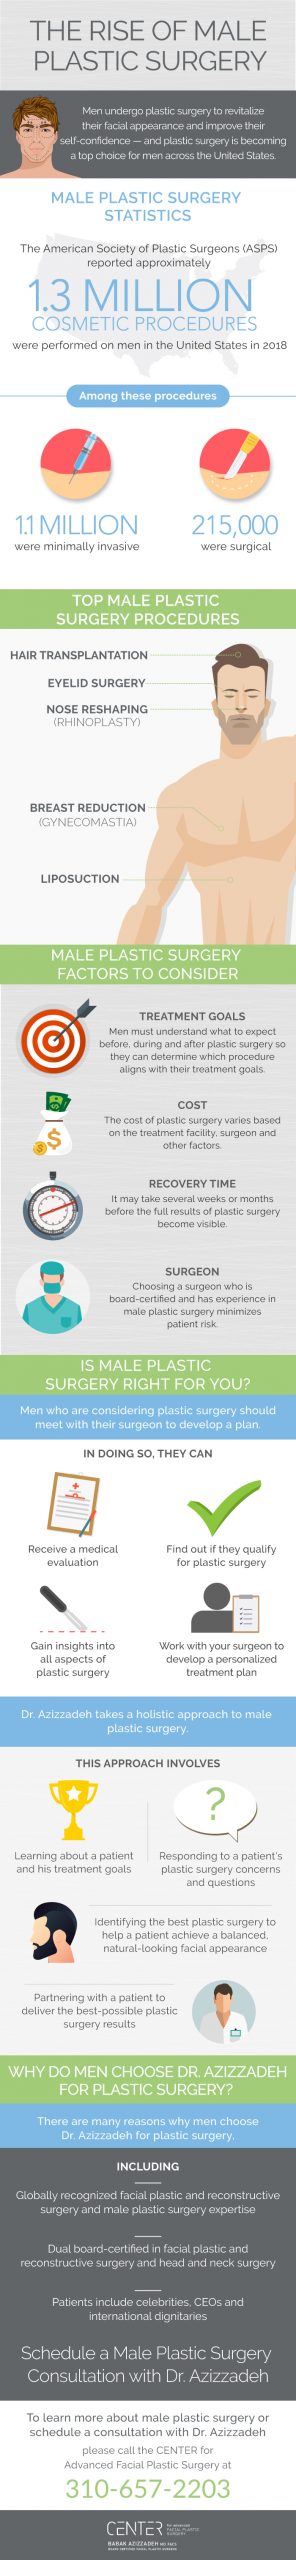 The rise of male plastic surgery